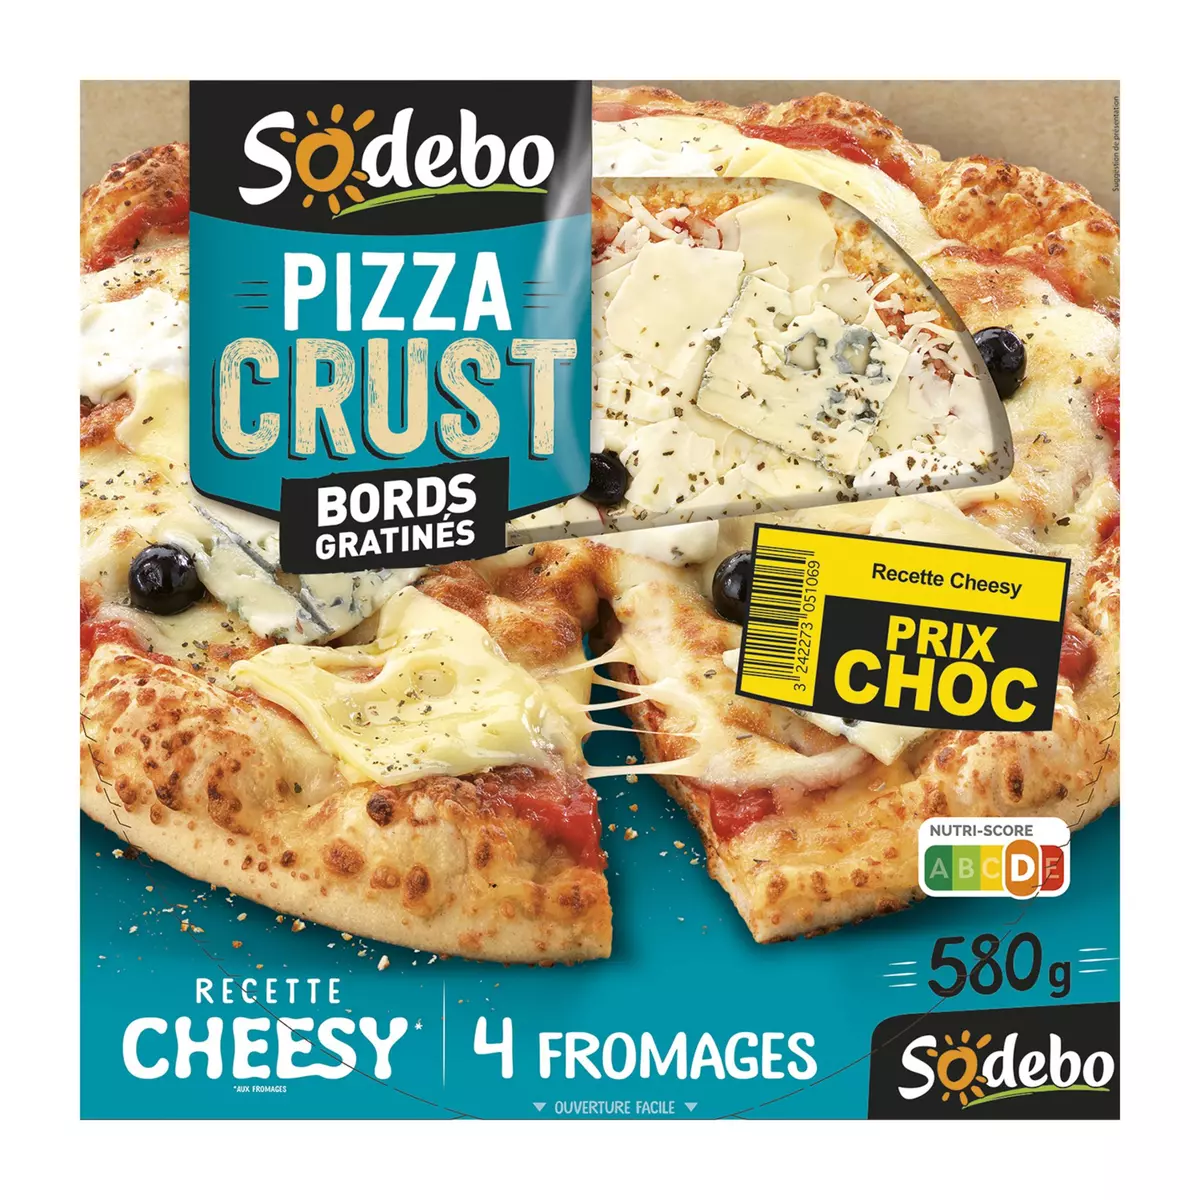 SODEBO Pizza crust 4 fromages bords gratinés 580g